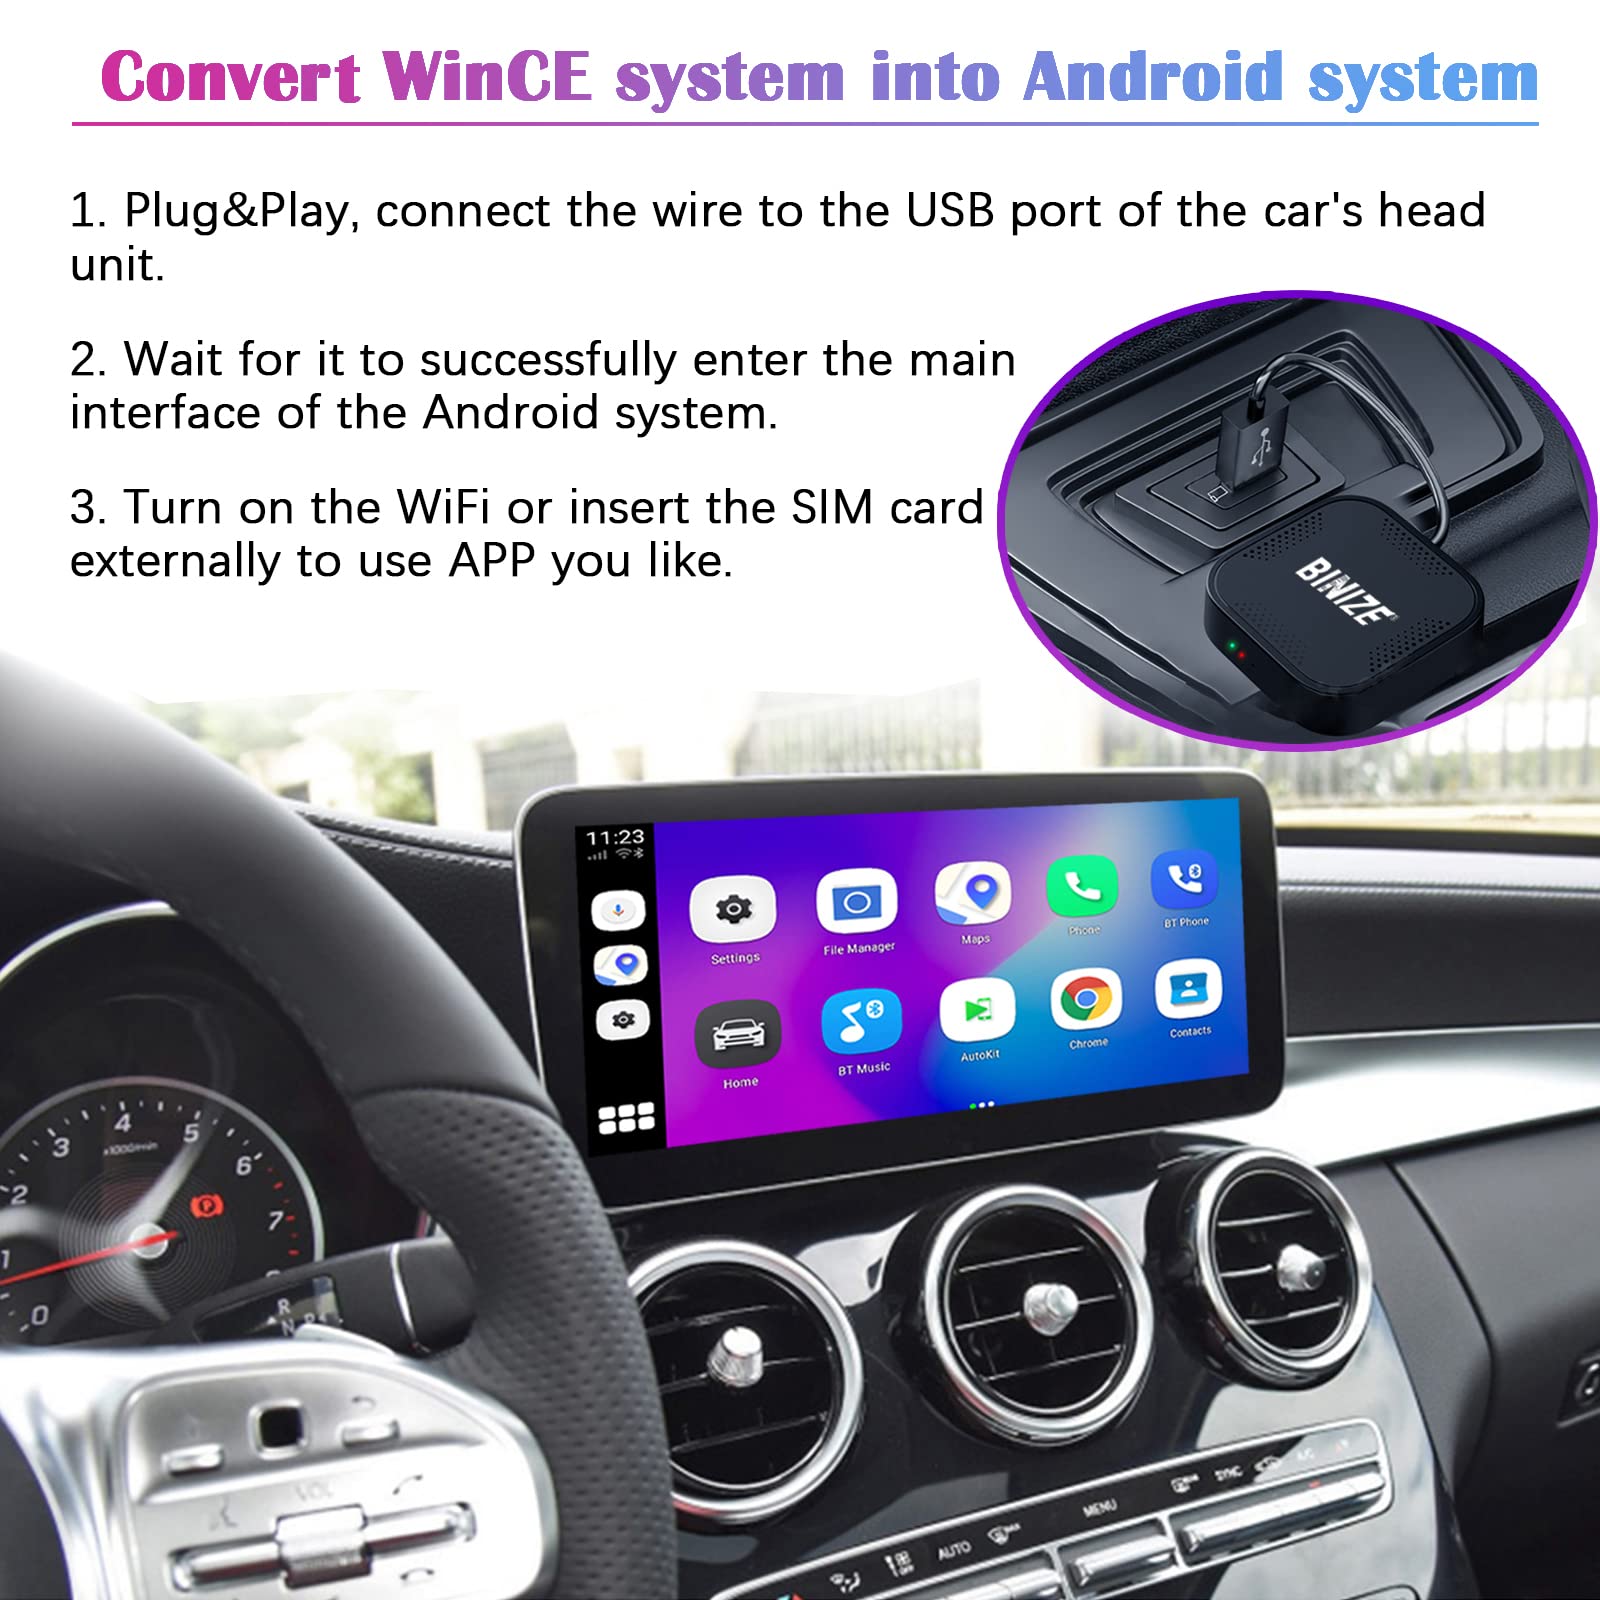 Binize Wireless CarPlay Android Auto Multimedia Video Box,4G Cellular,4GB+64GB,8Core, Android 13, Built-in Navigation, Support S